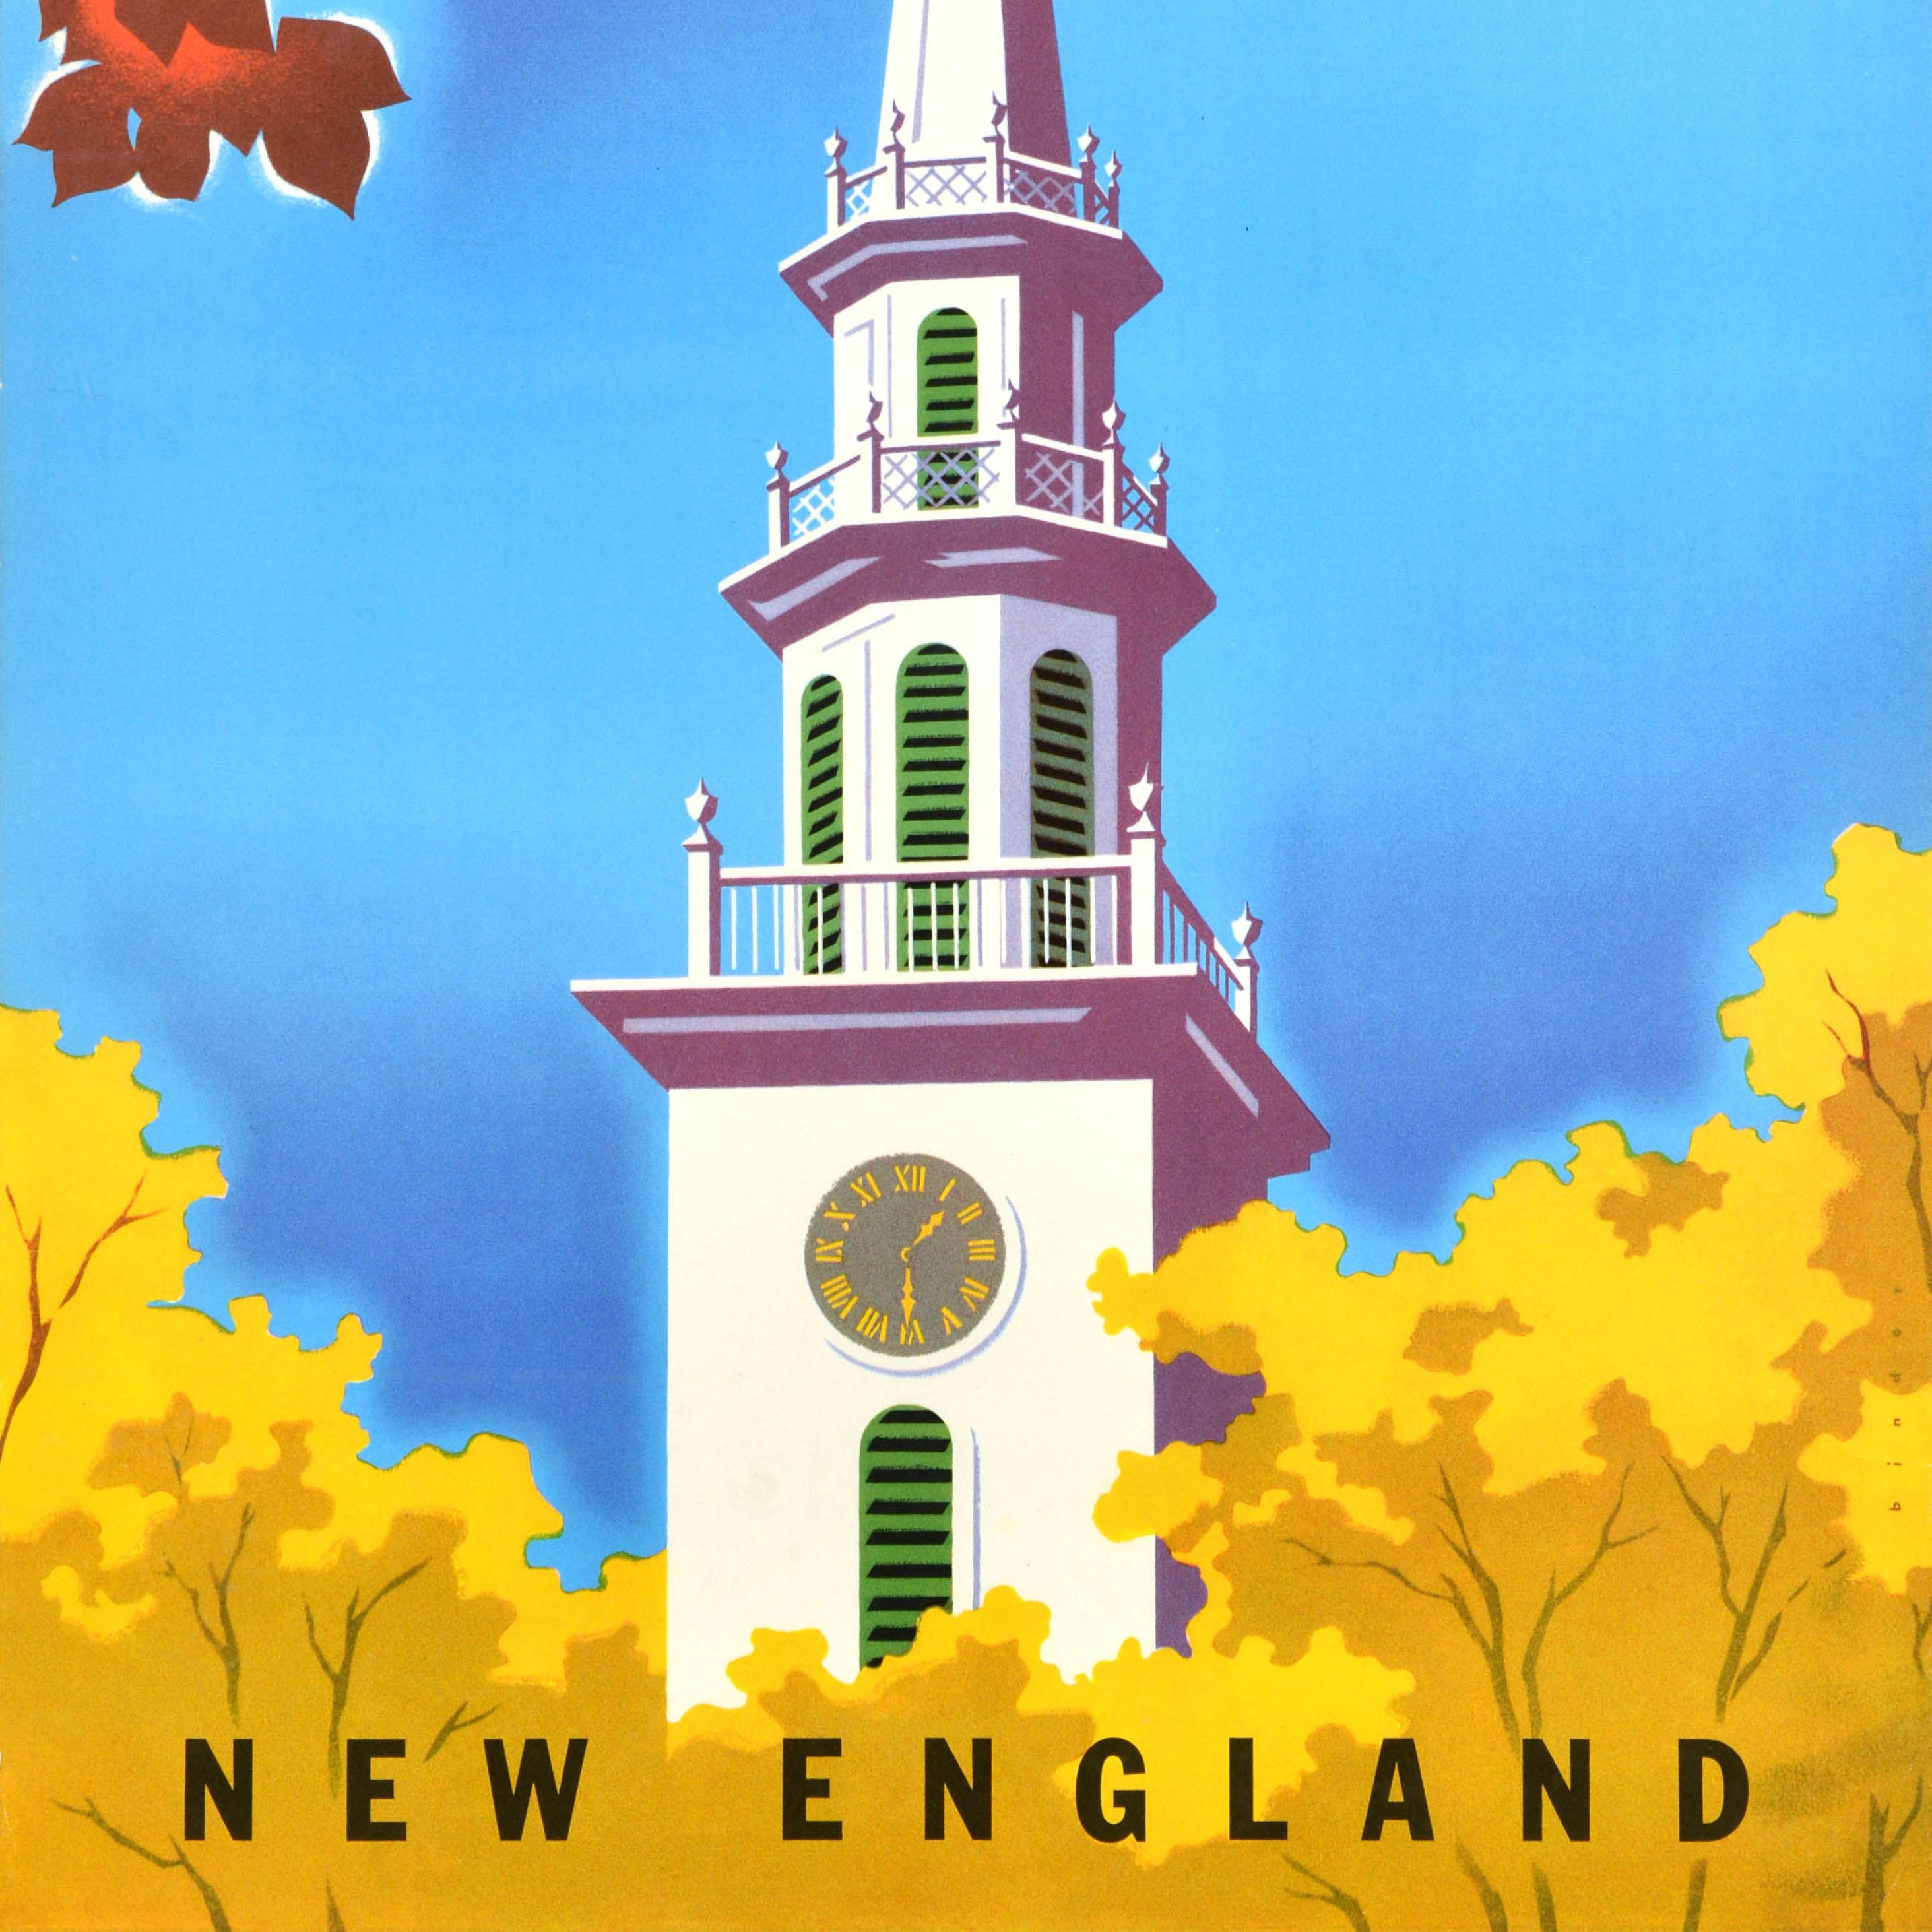 Original vintage travel advertising poster for United Air Lines New England featuring artwork by the Austrian-born graphic designer Joseph Binder (1898-1972) depicting a plane flying behind a clock tower framed by trees with autumn brown and yellow